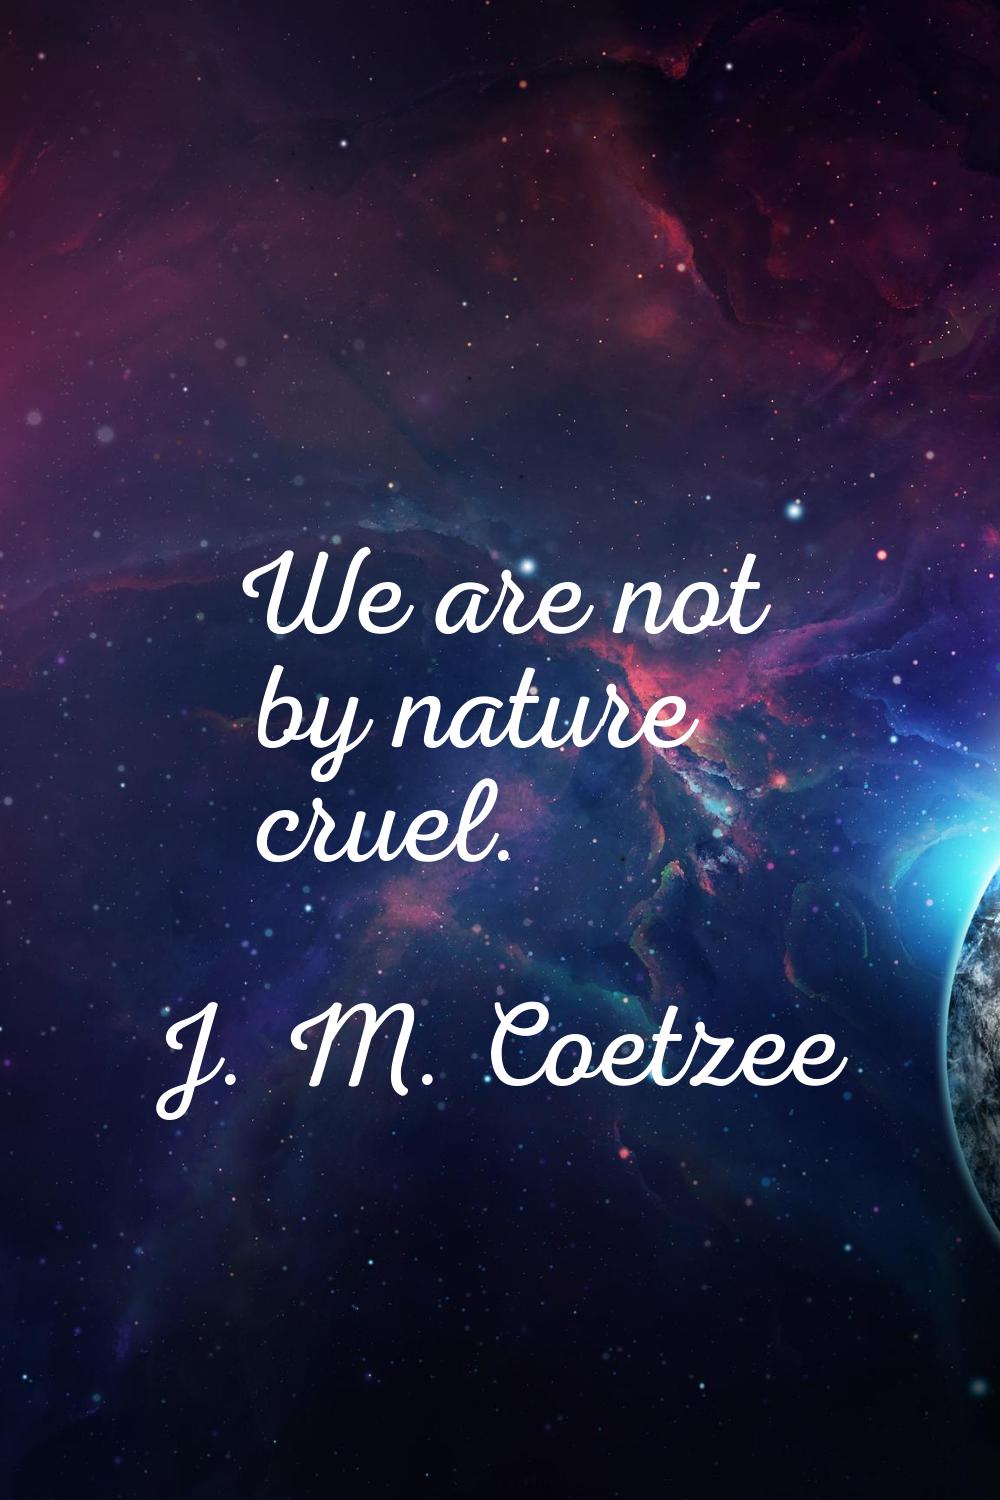 We are not by nature cruel.